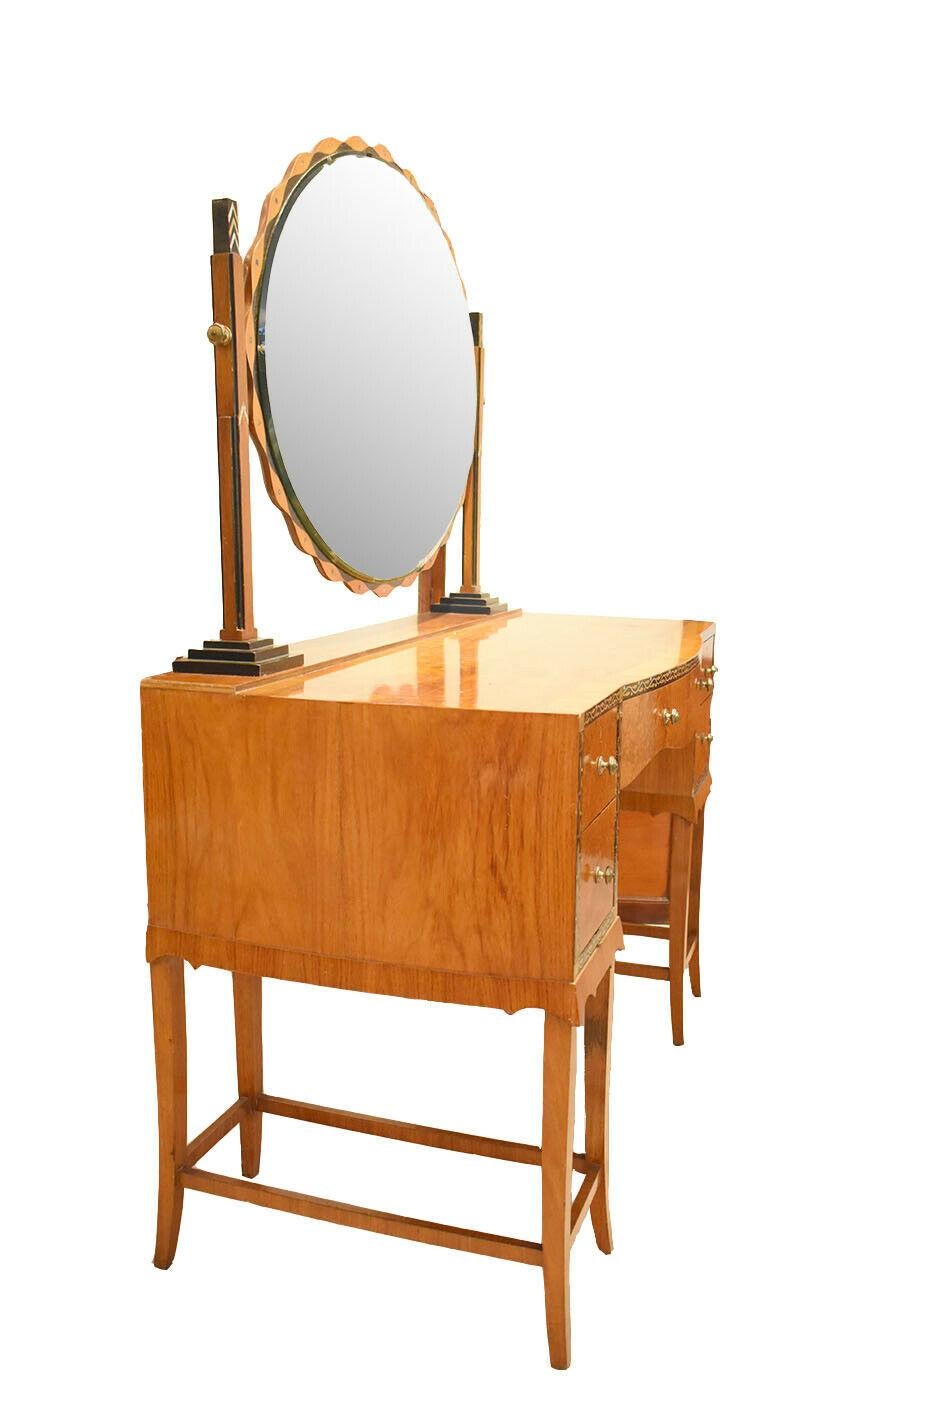 A beautiful Art Deco dressing table by Herbert Richter for Bath cabinet makers.

Made from Burr walnut and ebonized and mother of pearl inlaid details. 
Really beautiful piece, would look amazing in any dressing room or bedroom.